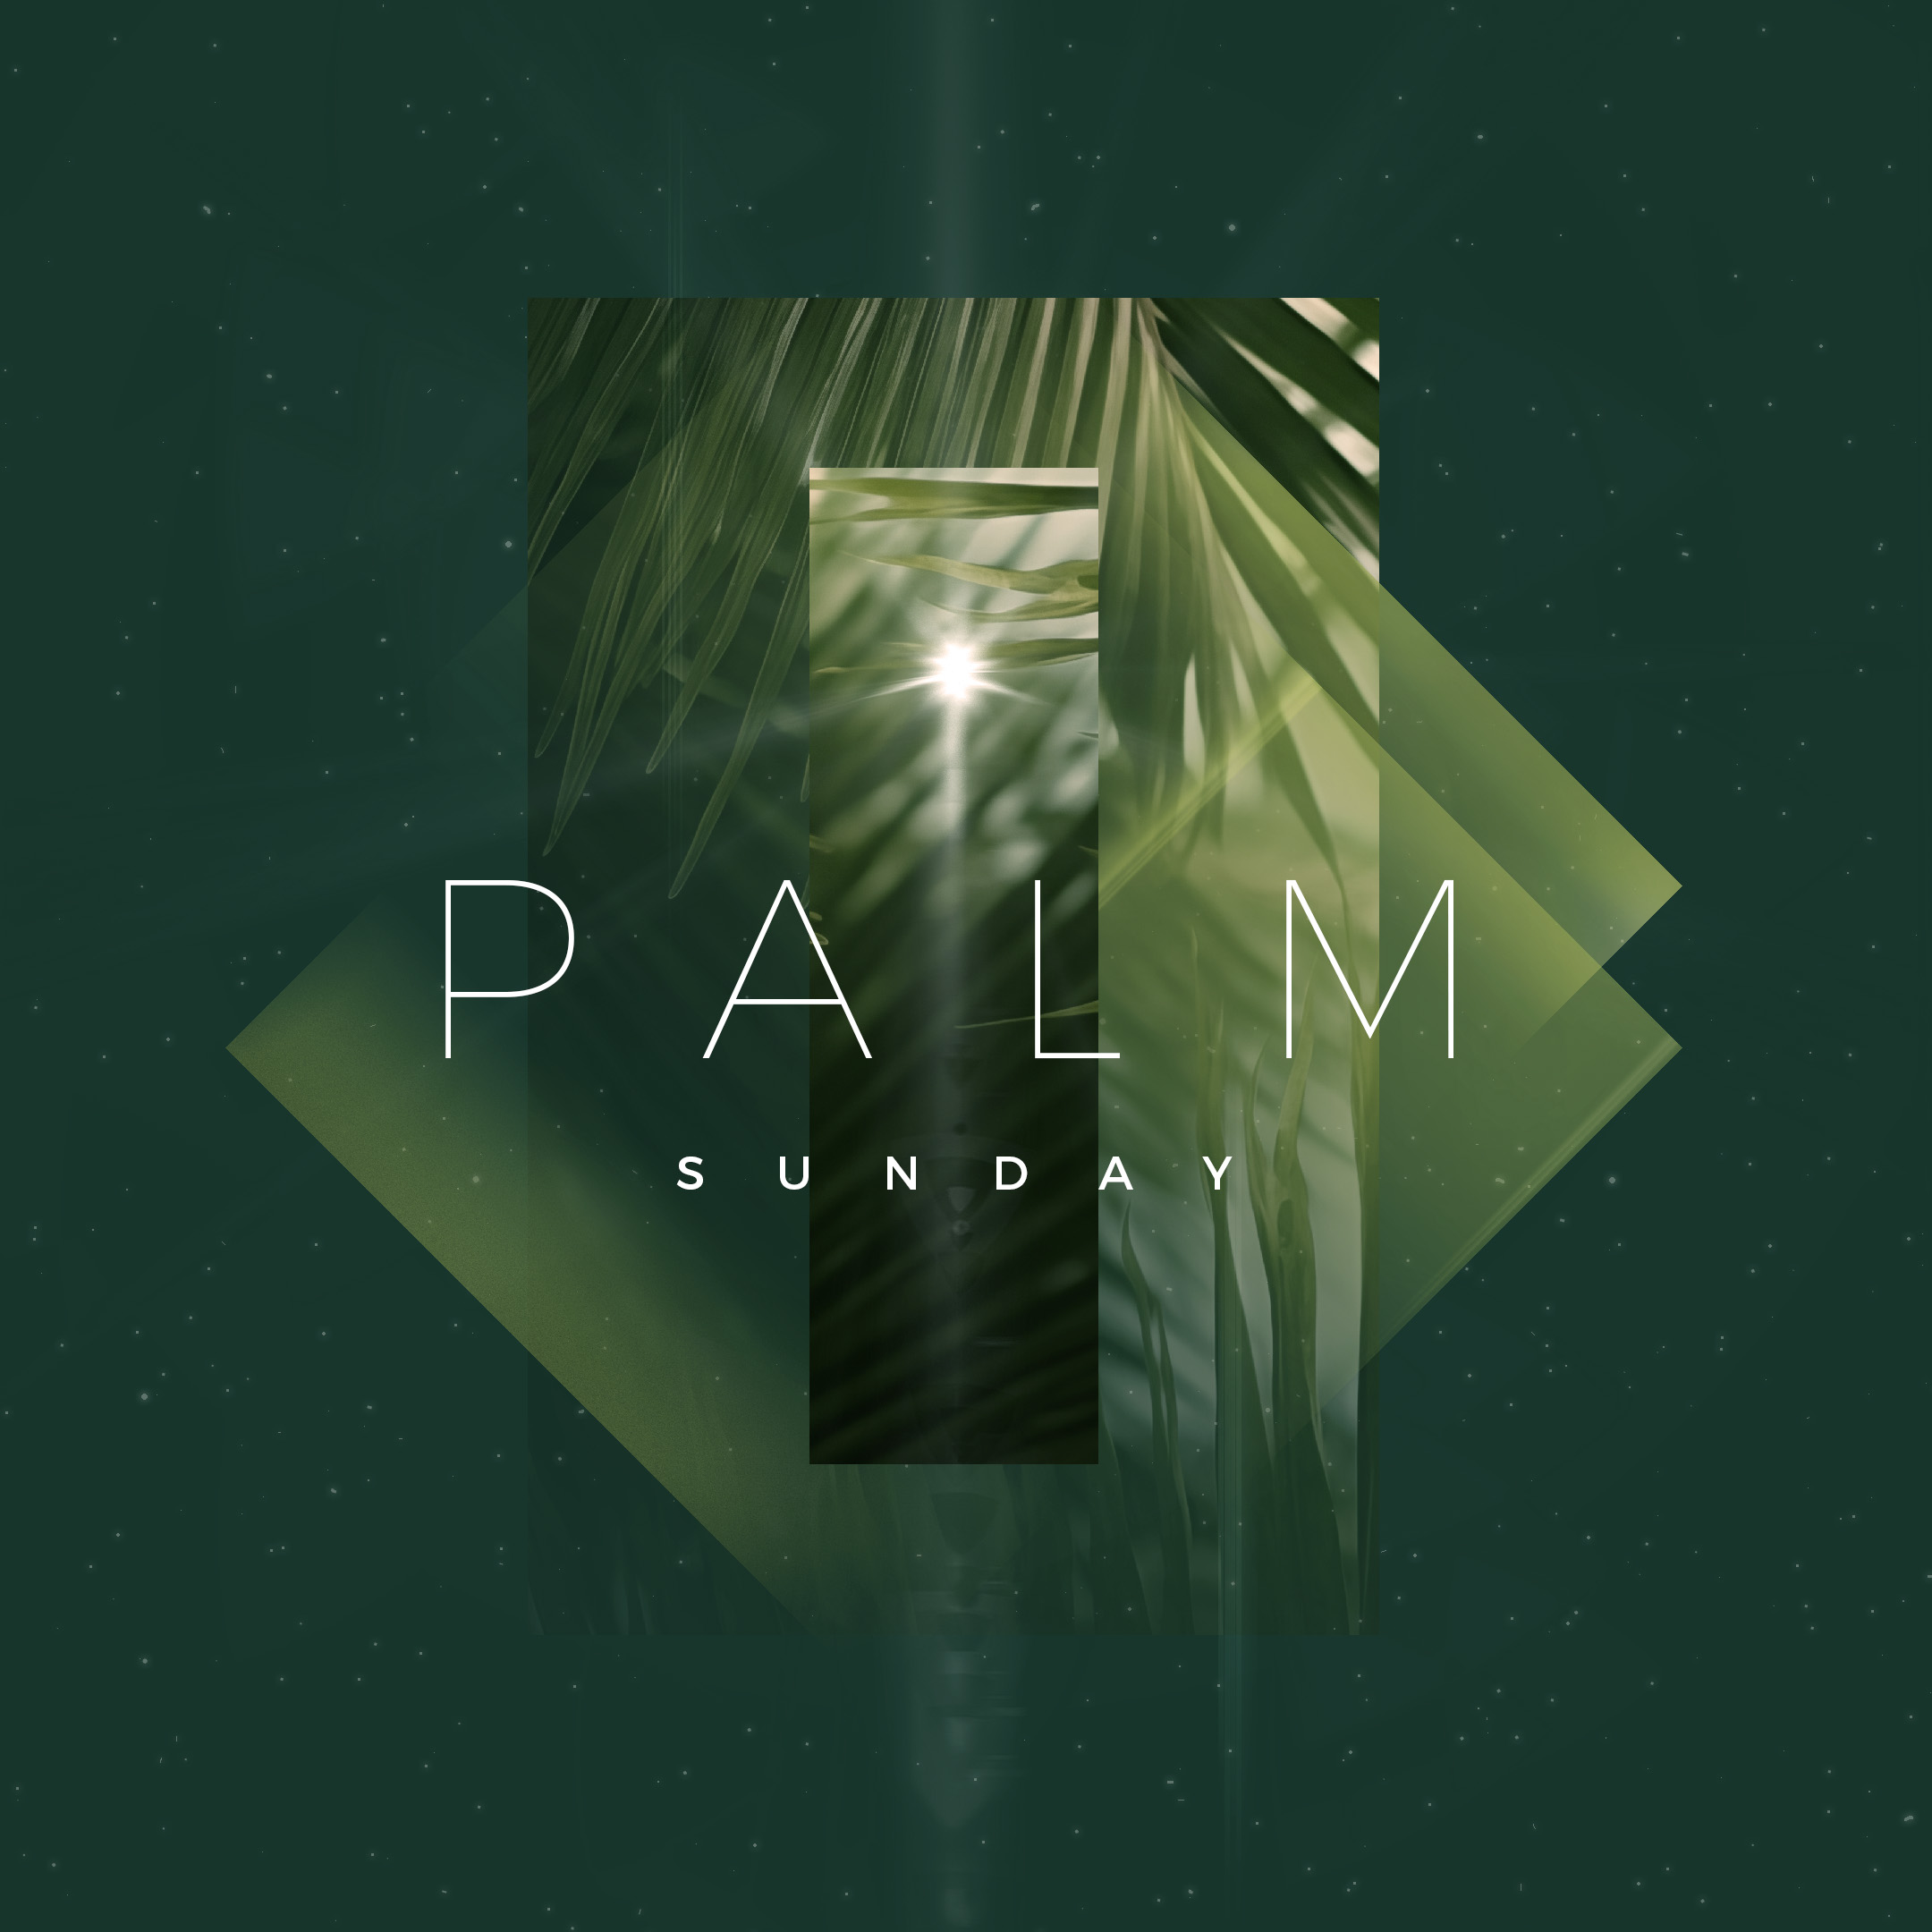 Unmet Expectations - 9am Palm Sunday